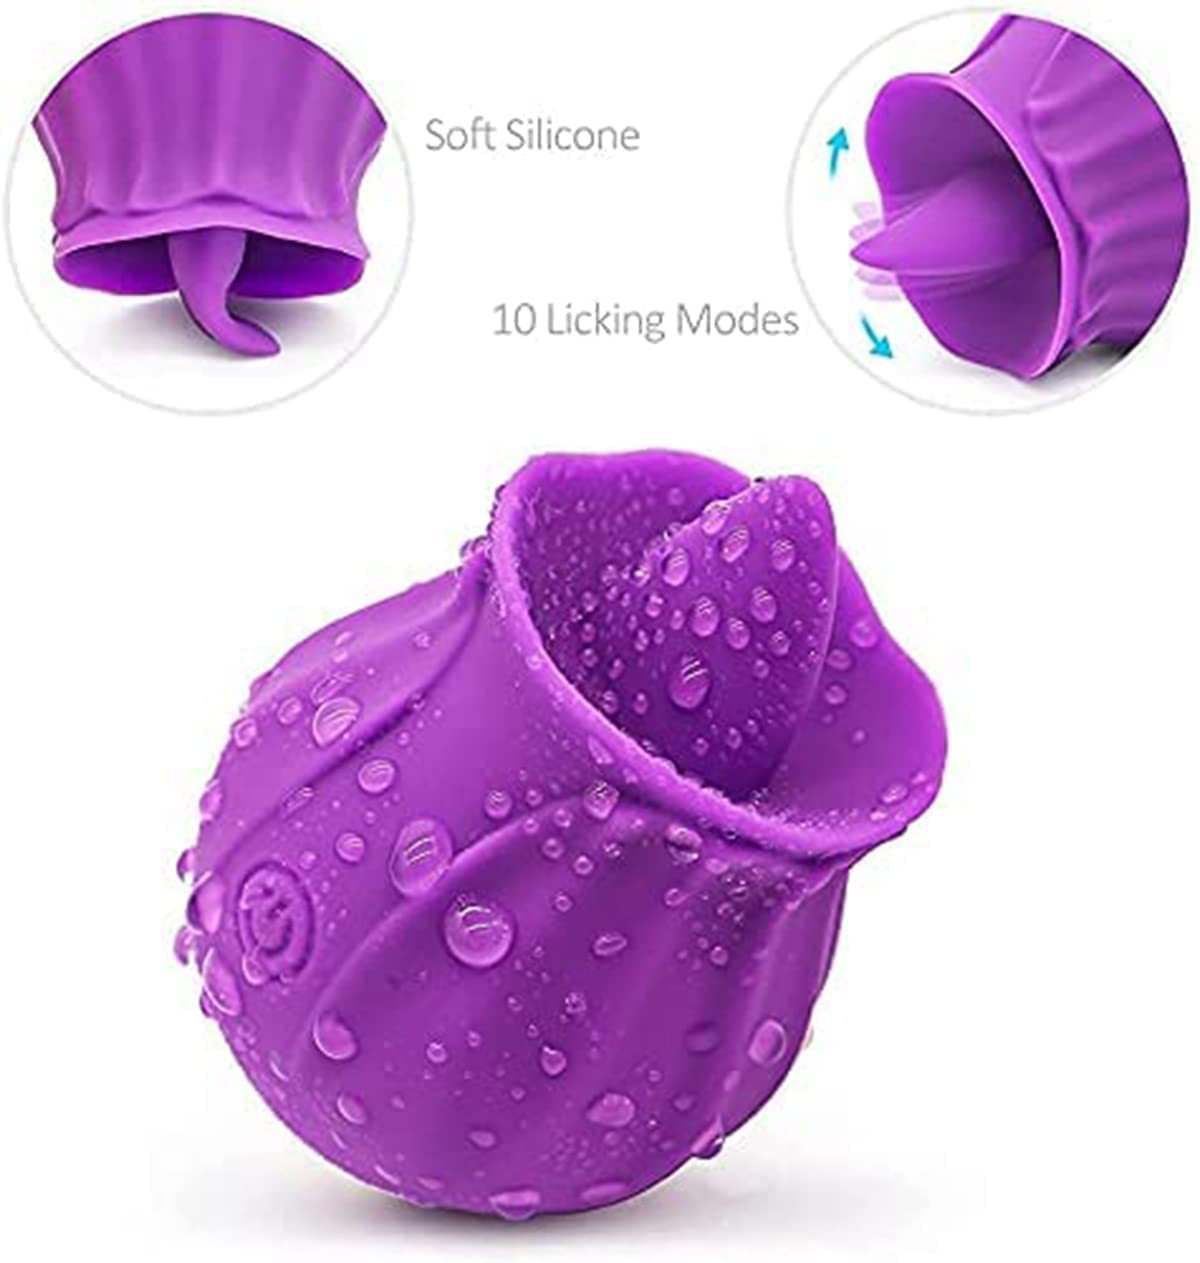 10 Frequencies Touch of Happiness Powerful Purple Rose Tongue Mini Massager